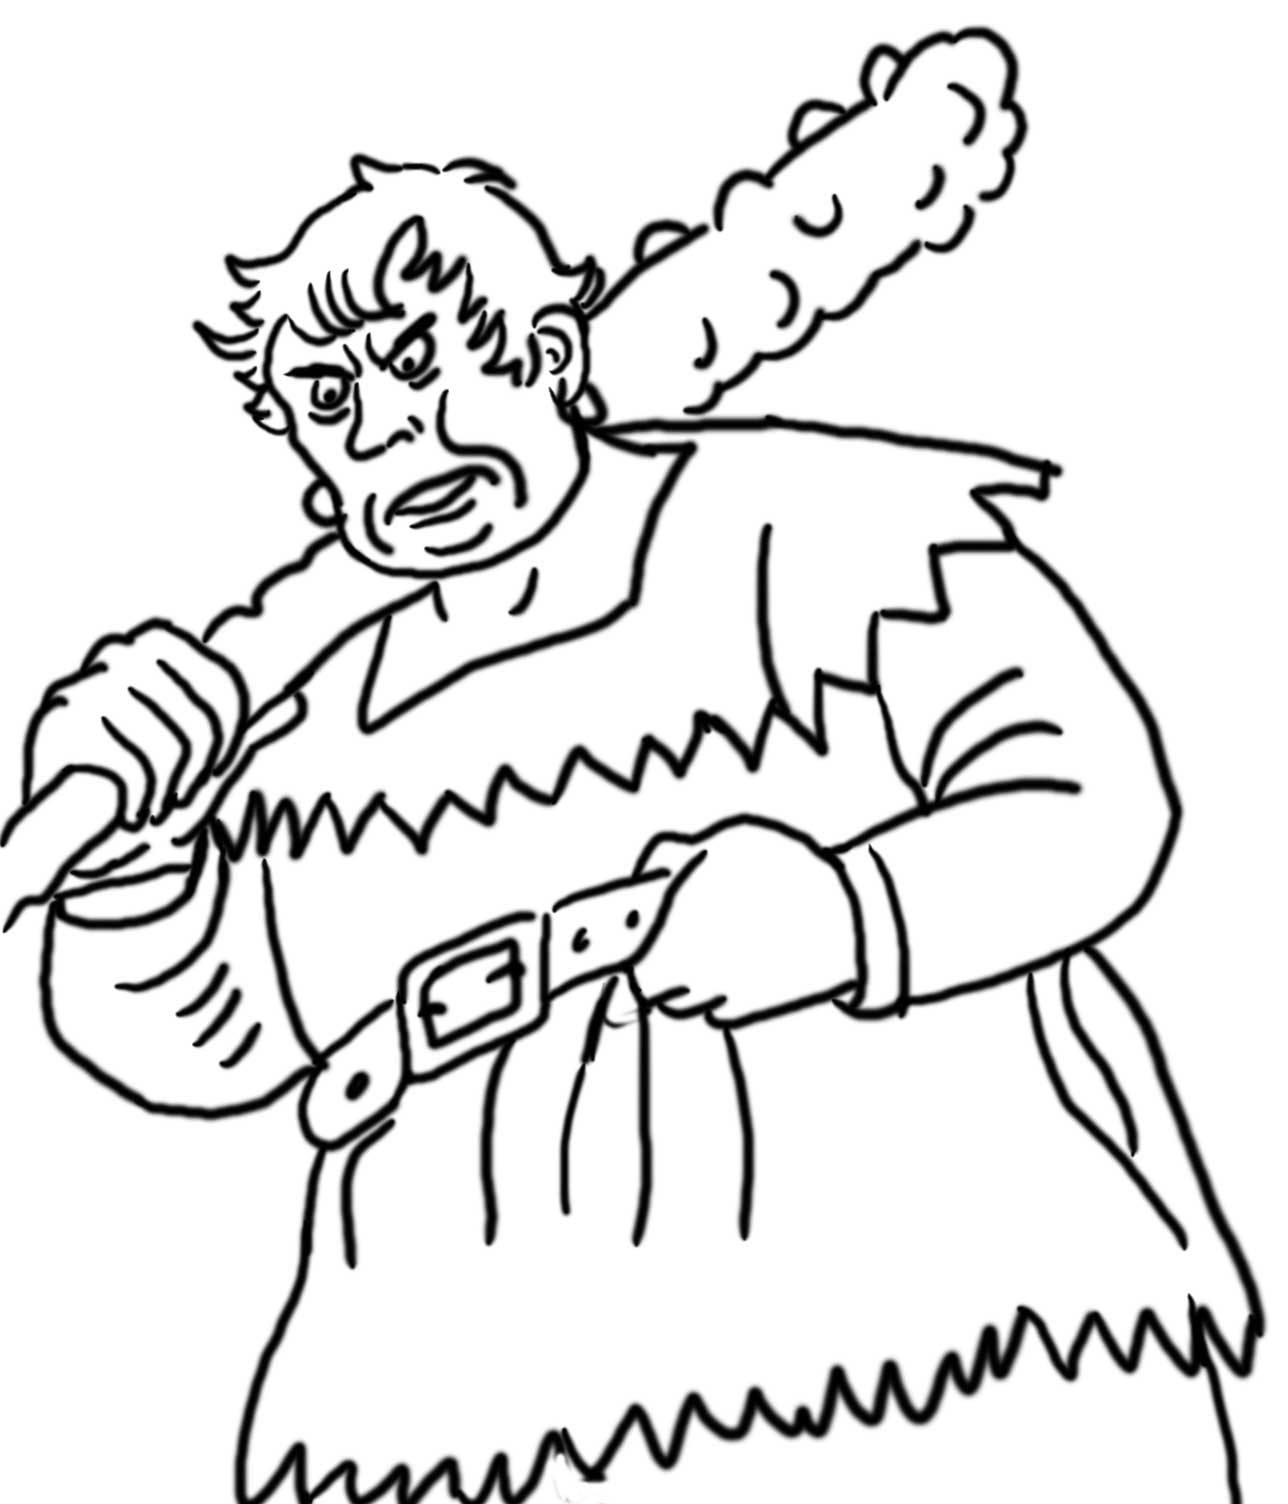 Drawing Giant 20 Characters – Printable coloring pages